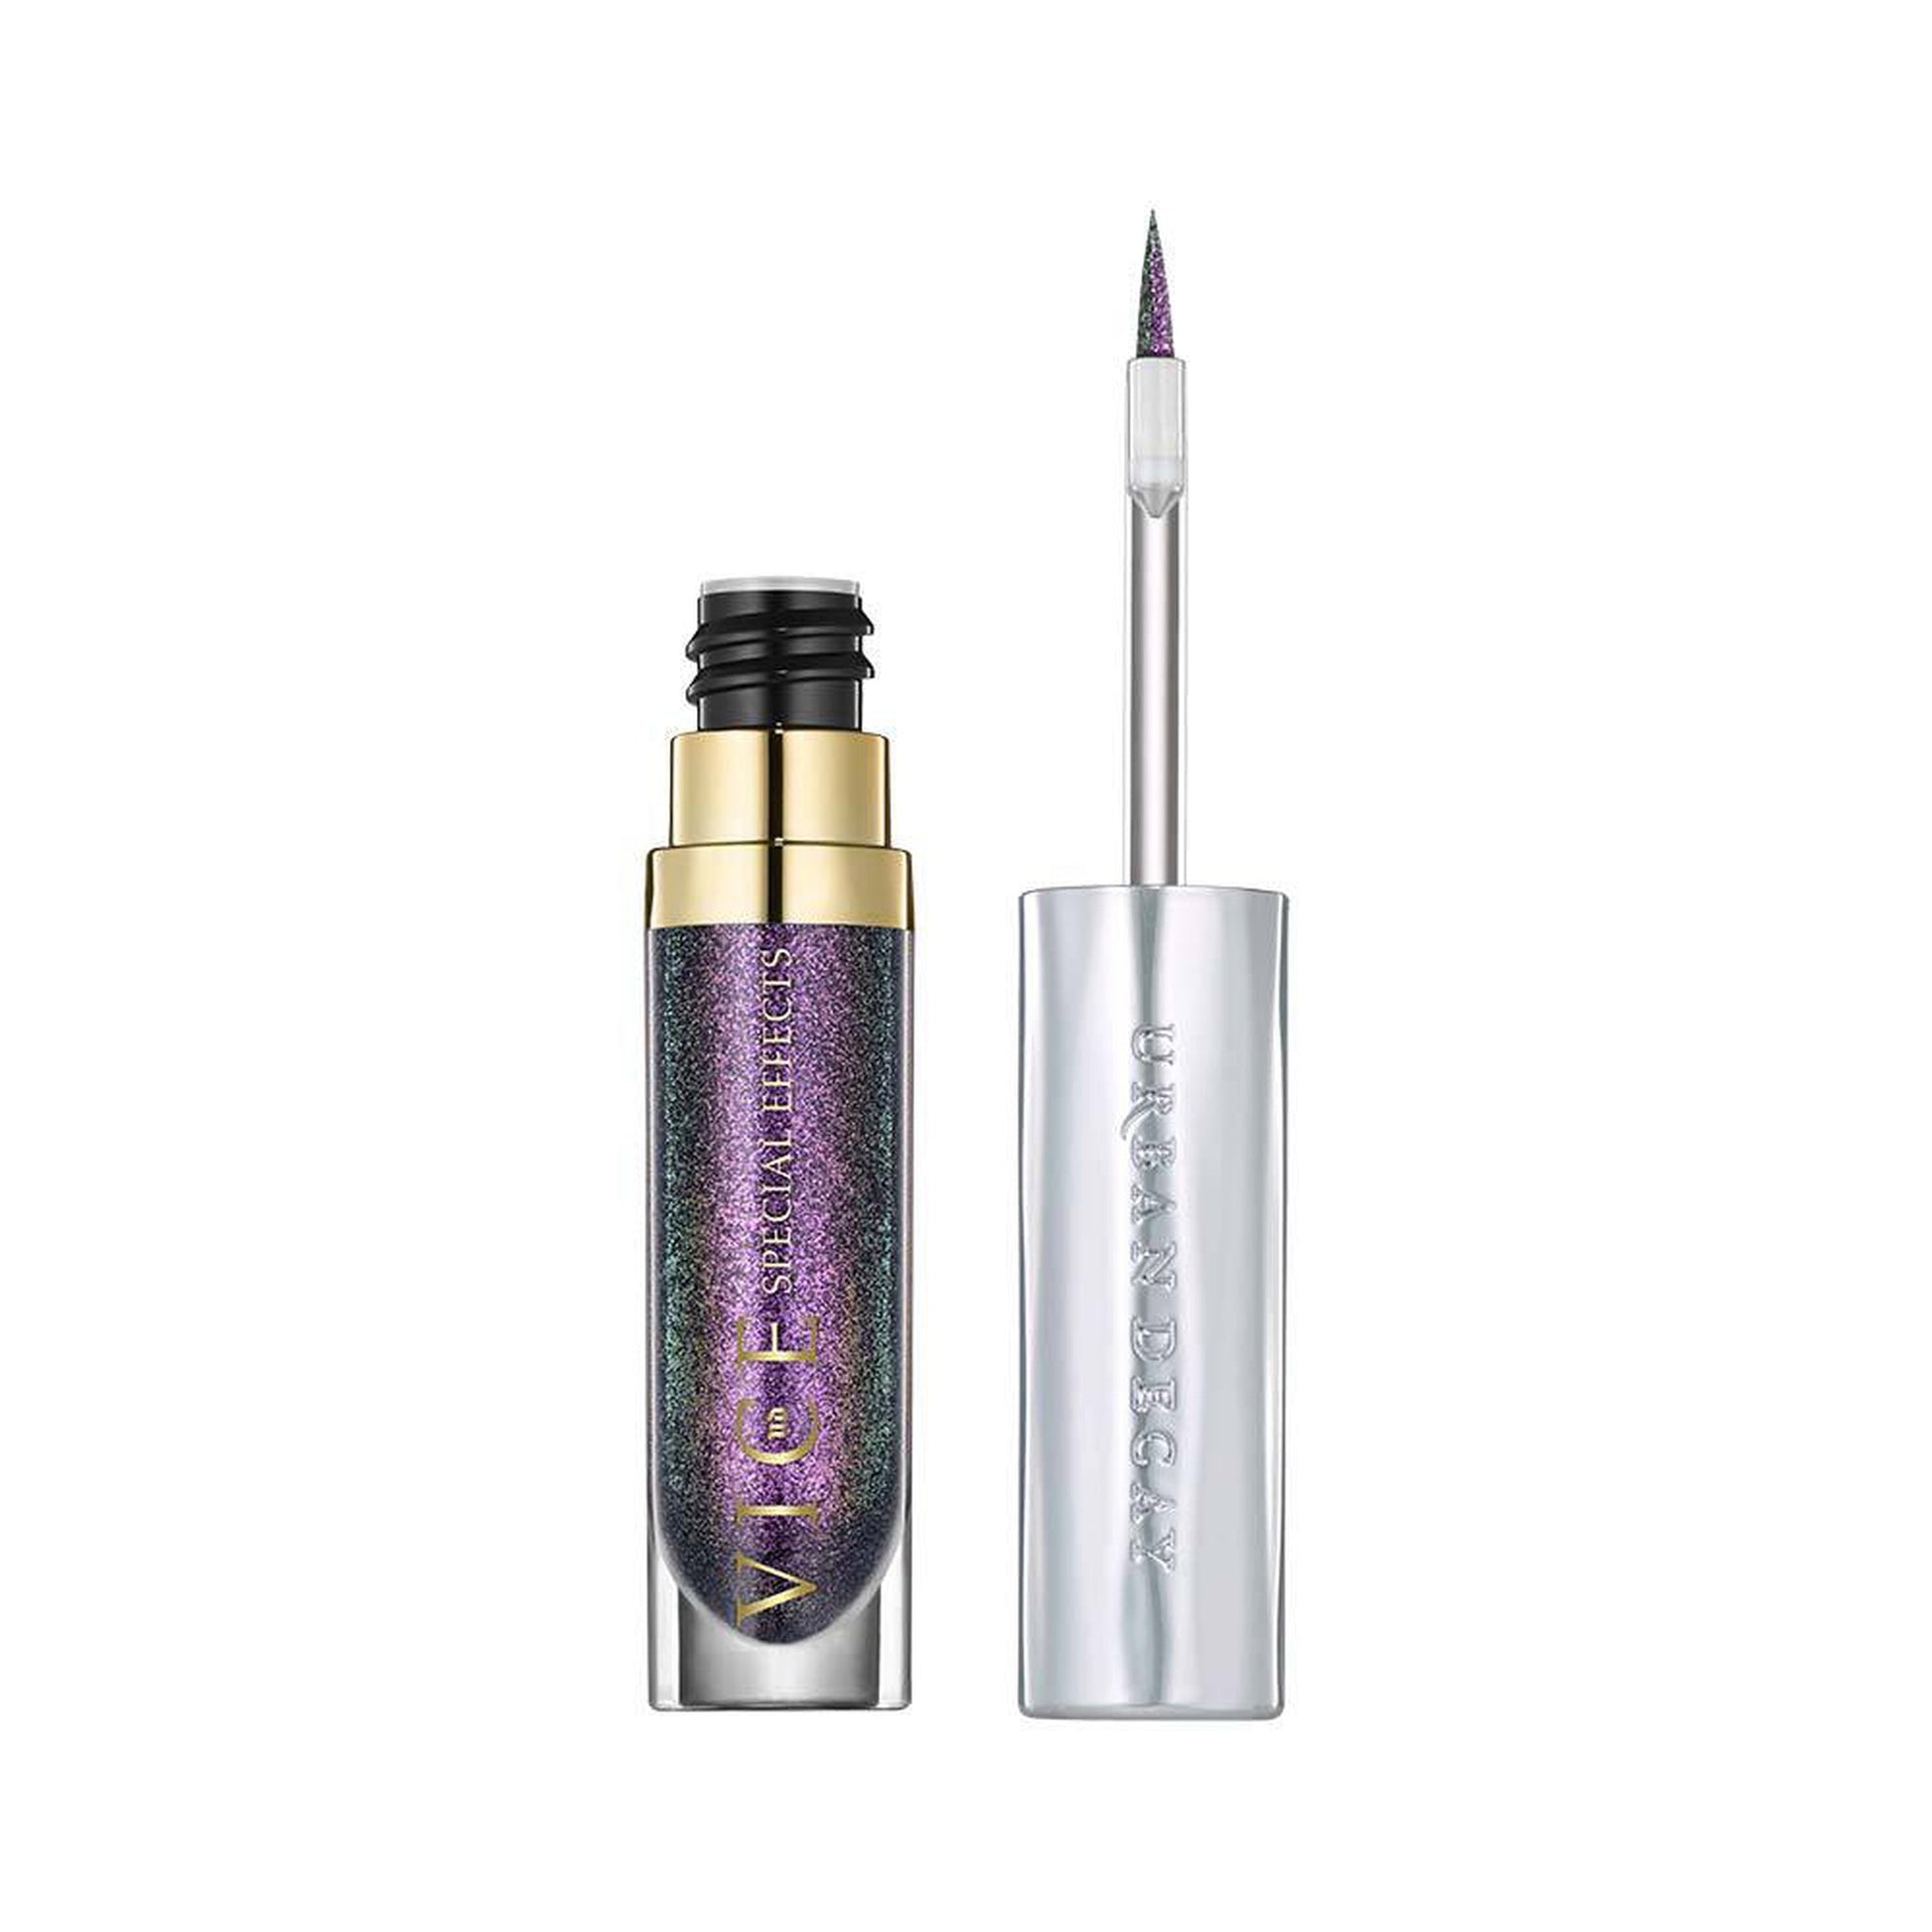 Urban Decay VICE SPECIAL EFFECTS Long-Lasting Water-Resistant Lip Topcoat - Reverb-URBAN DECAY-BeautyNmakeup.co.uk